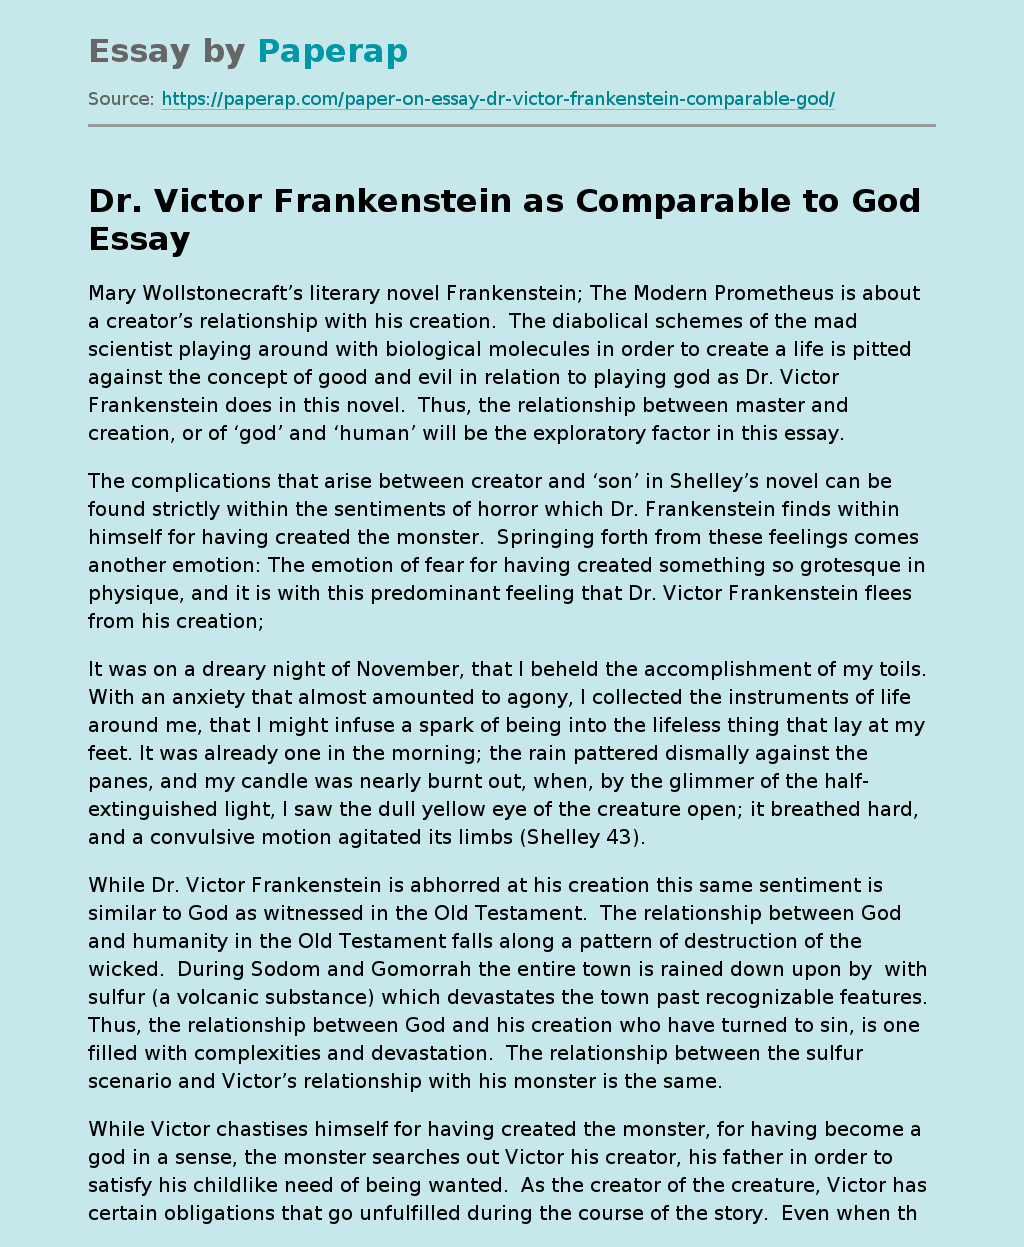 Dr. Victor Frankenstein as Comparable to God